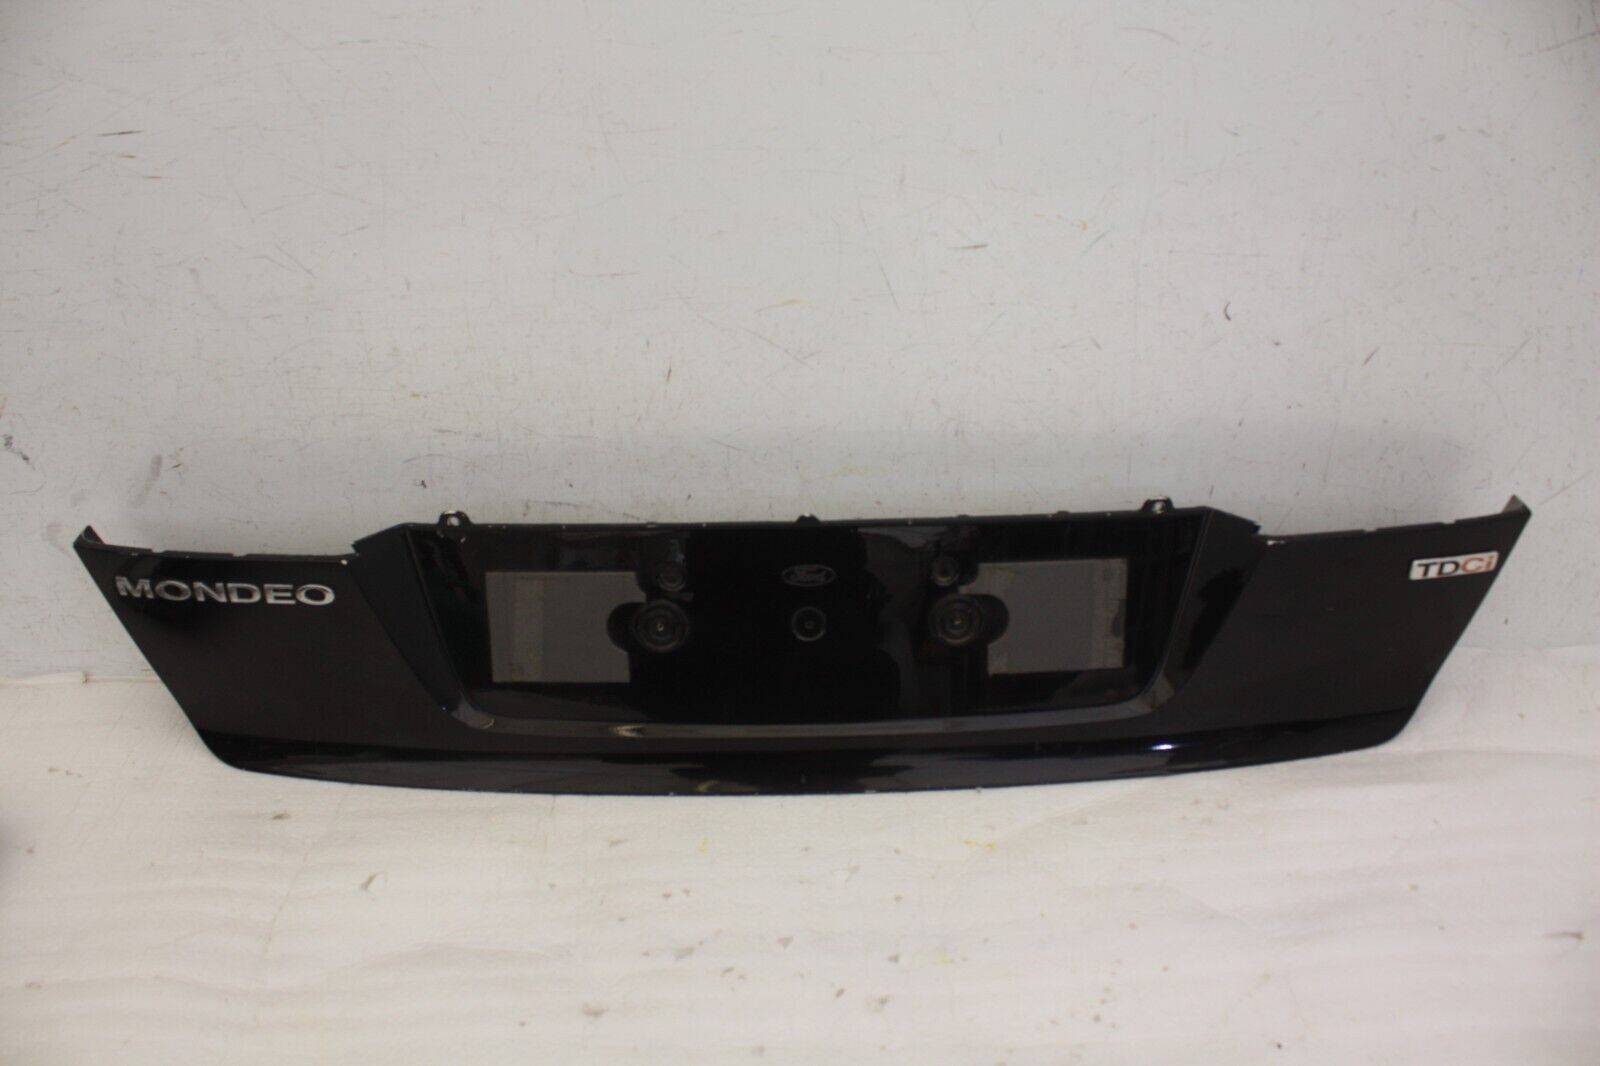 Ford-Mondeo-Rear-Tailgate-Lower-Section-7S71-A423A40-A-Genuine-176390241999